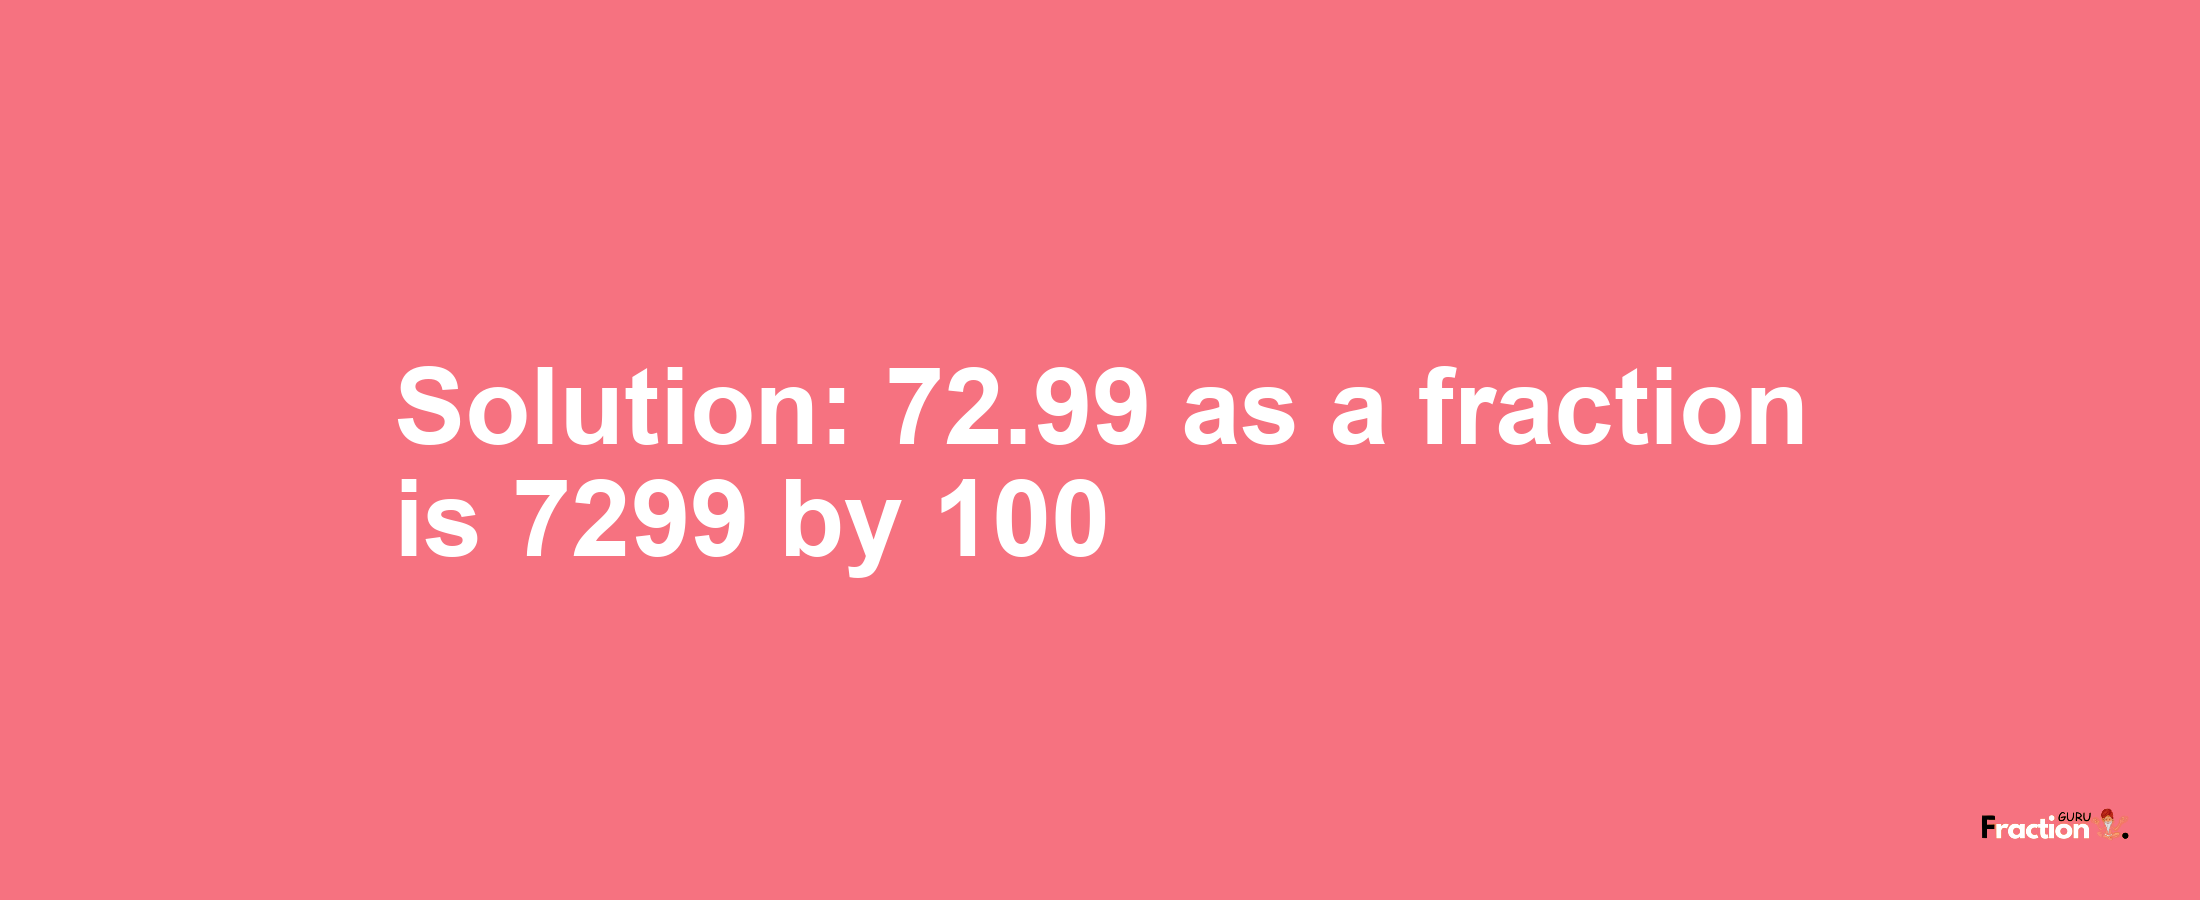 Solution:72.99 as a fraction is 7299/100